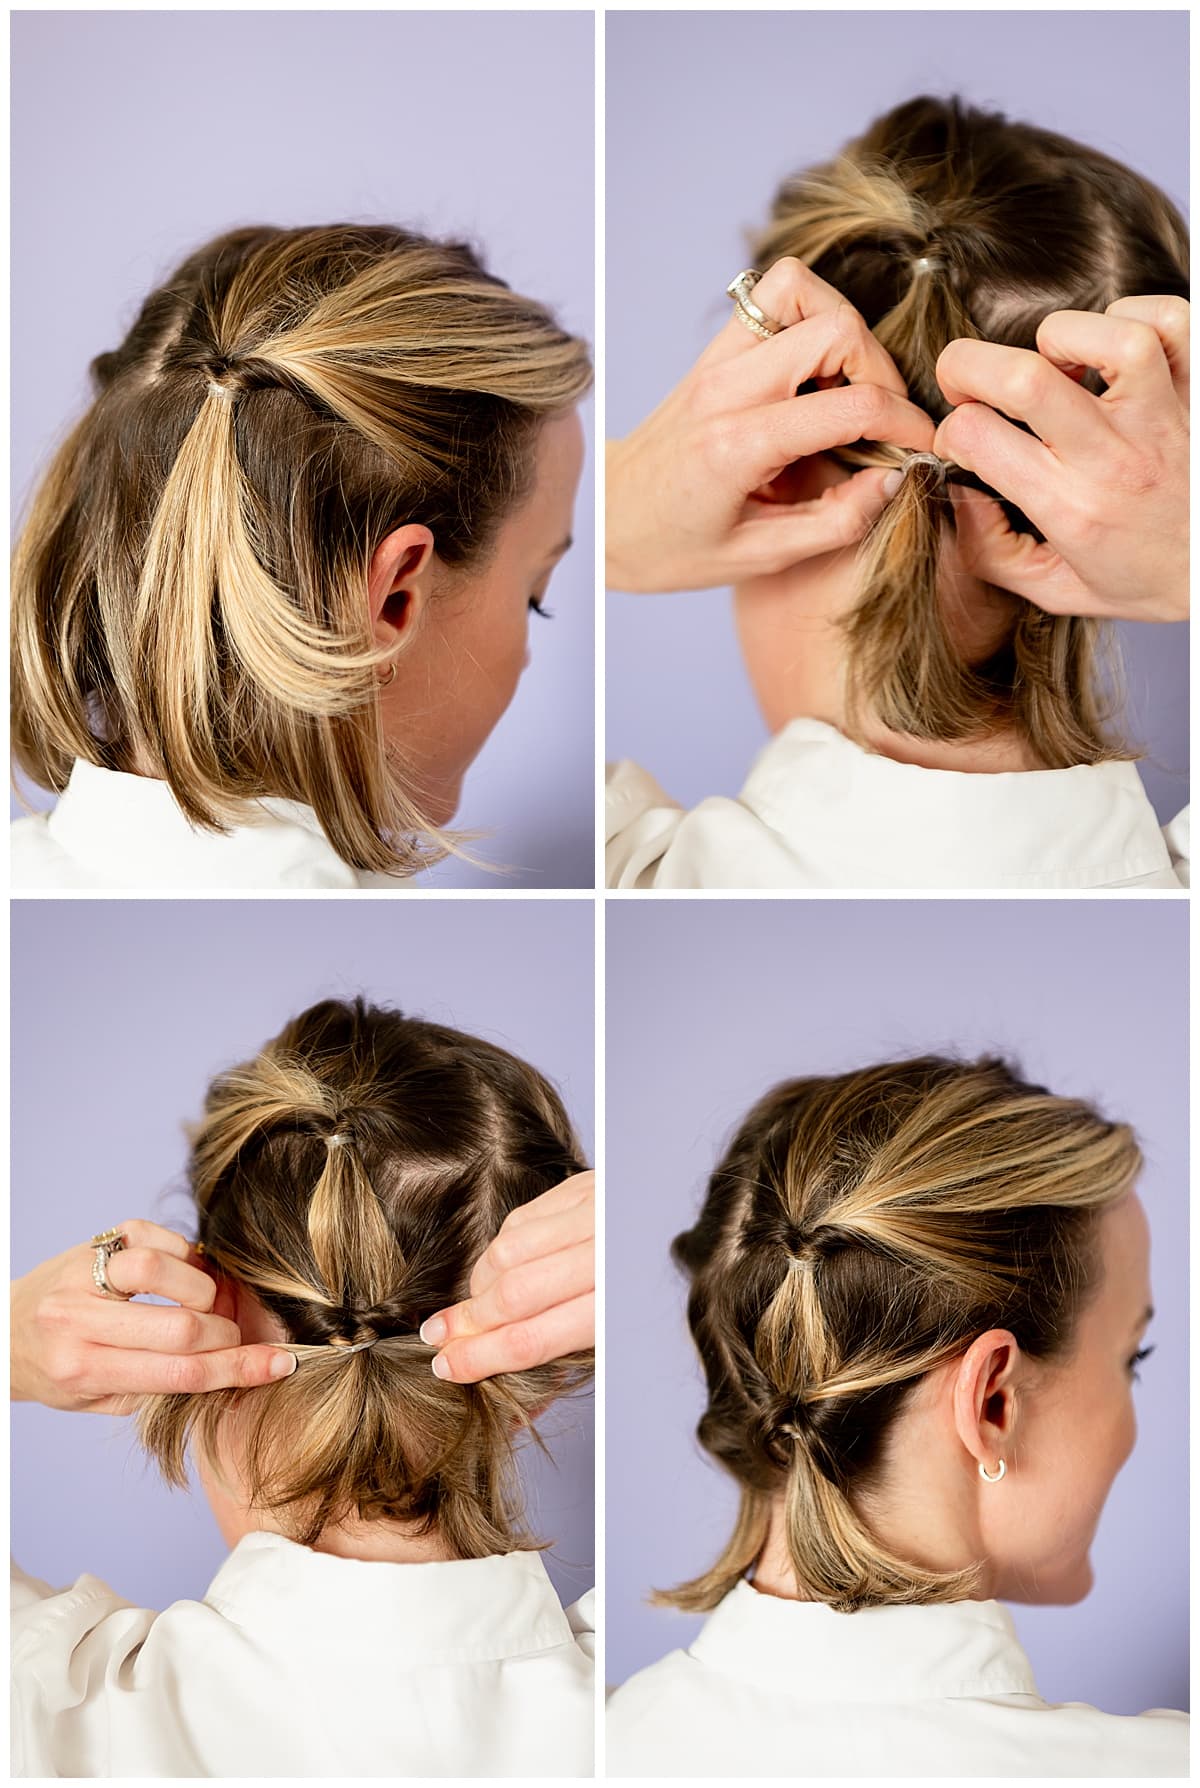 Step-by-step picture tutorial on how to do a stylish pigtails hairstyle on short hair.